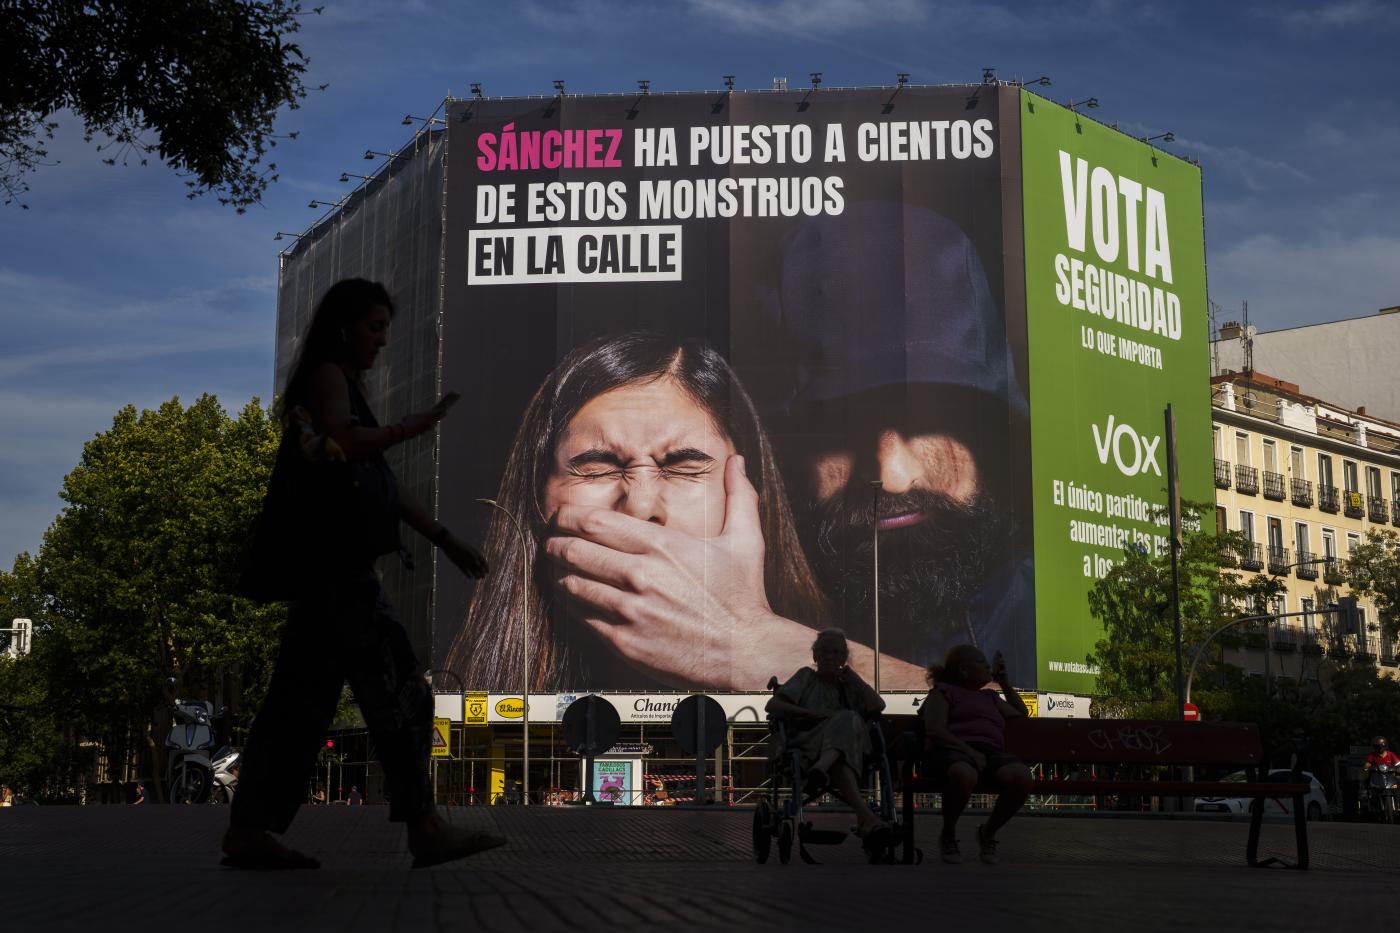 A woman walks past a giant electoral poster from VOX far-right party reading in Spanish: "Sanchez has put hundreds of these monsters on the street. Vote security. What matters.", is displayed on a building in Madrid, Spain, Wednesday, July 12, 2023. A general election on Sunday July 23, 2023, could make Spain the latest European Union member to swing to the right. Prime Minister Pedro Sánchez called the early election after his Spanish Socialist Workers' Party and its far-left partner, Unidas Podemos, took a beating in local and regional elections. (AP Photo/Manu Fernandez)

Associated Press/LaPresse
Only Italy and Spain